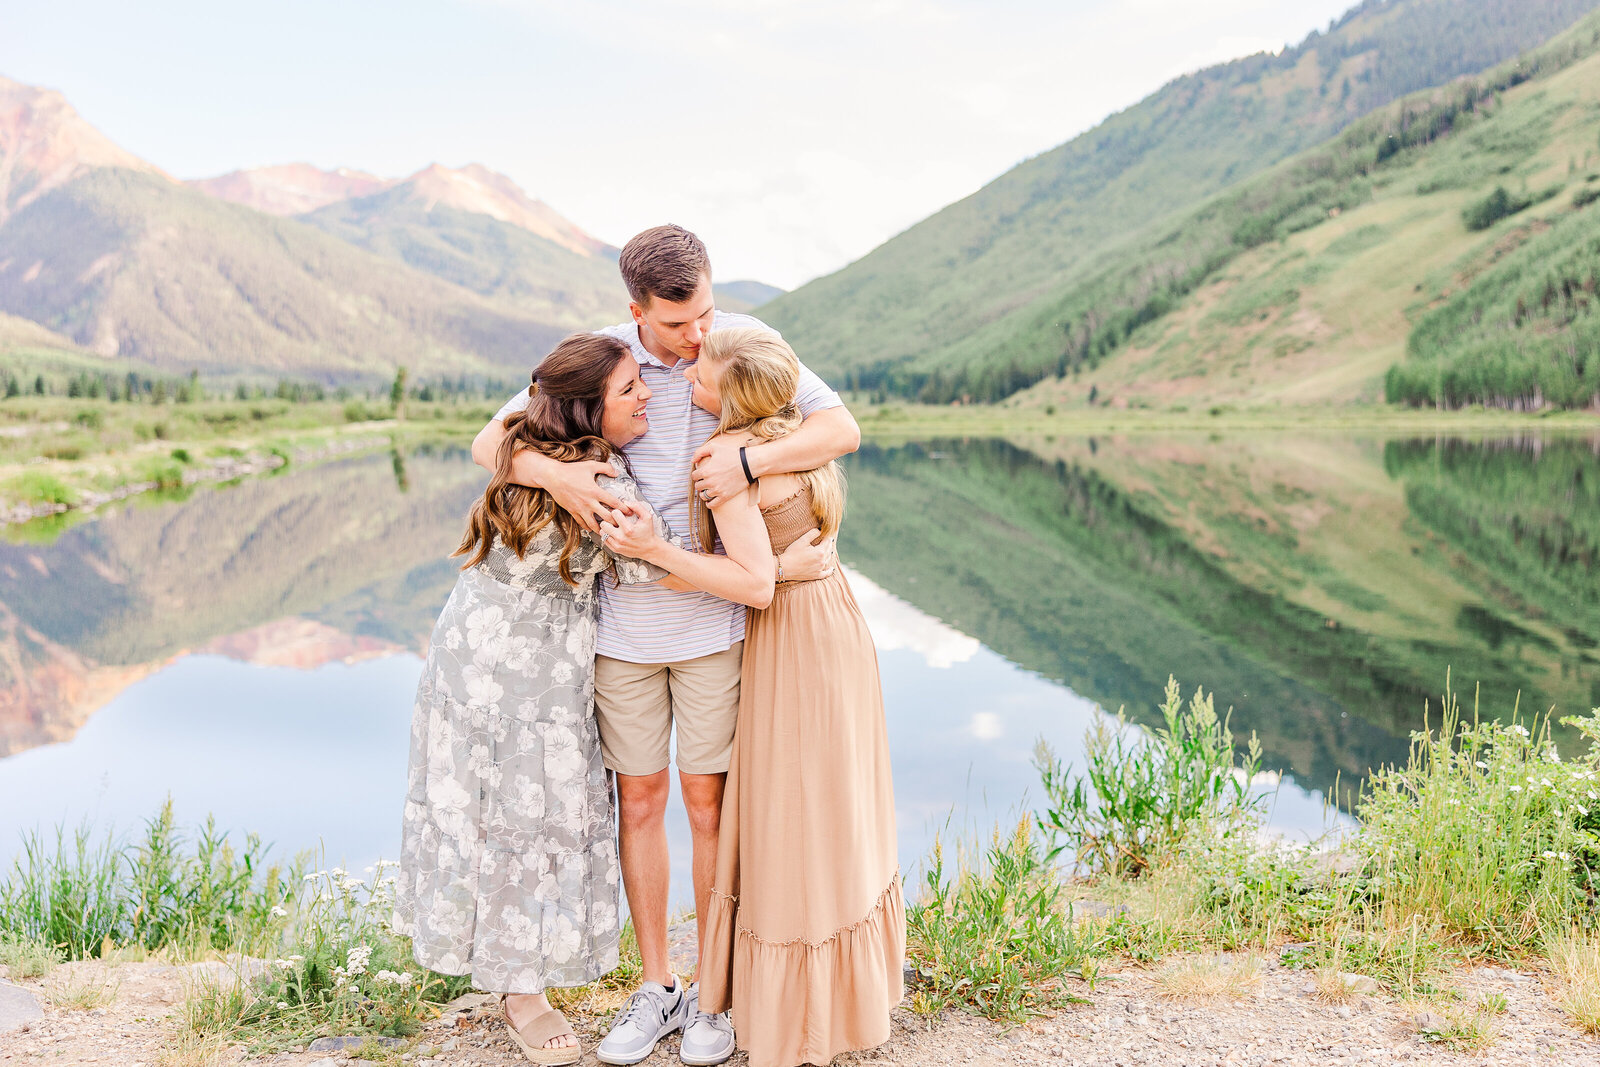 grown up kids hug for photo in ouray